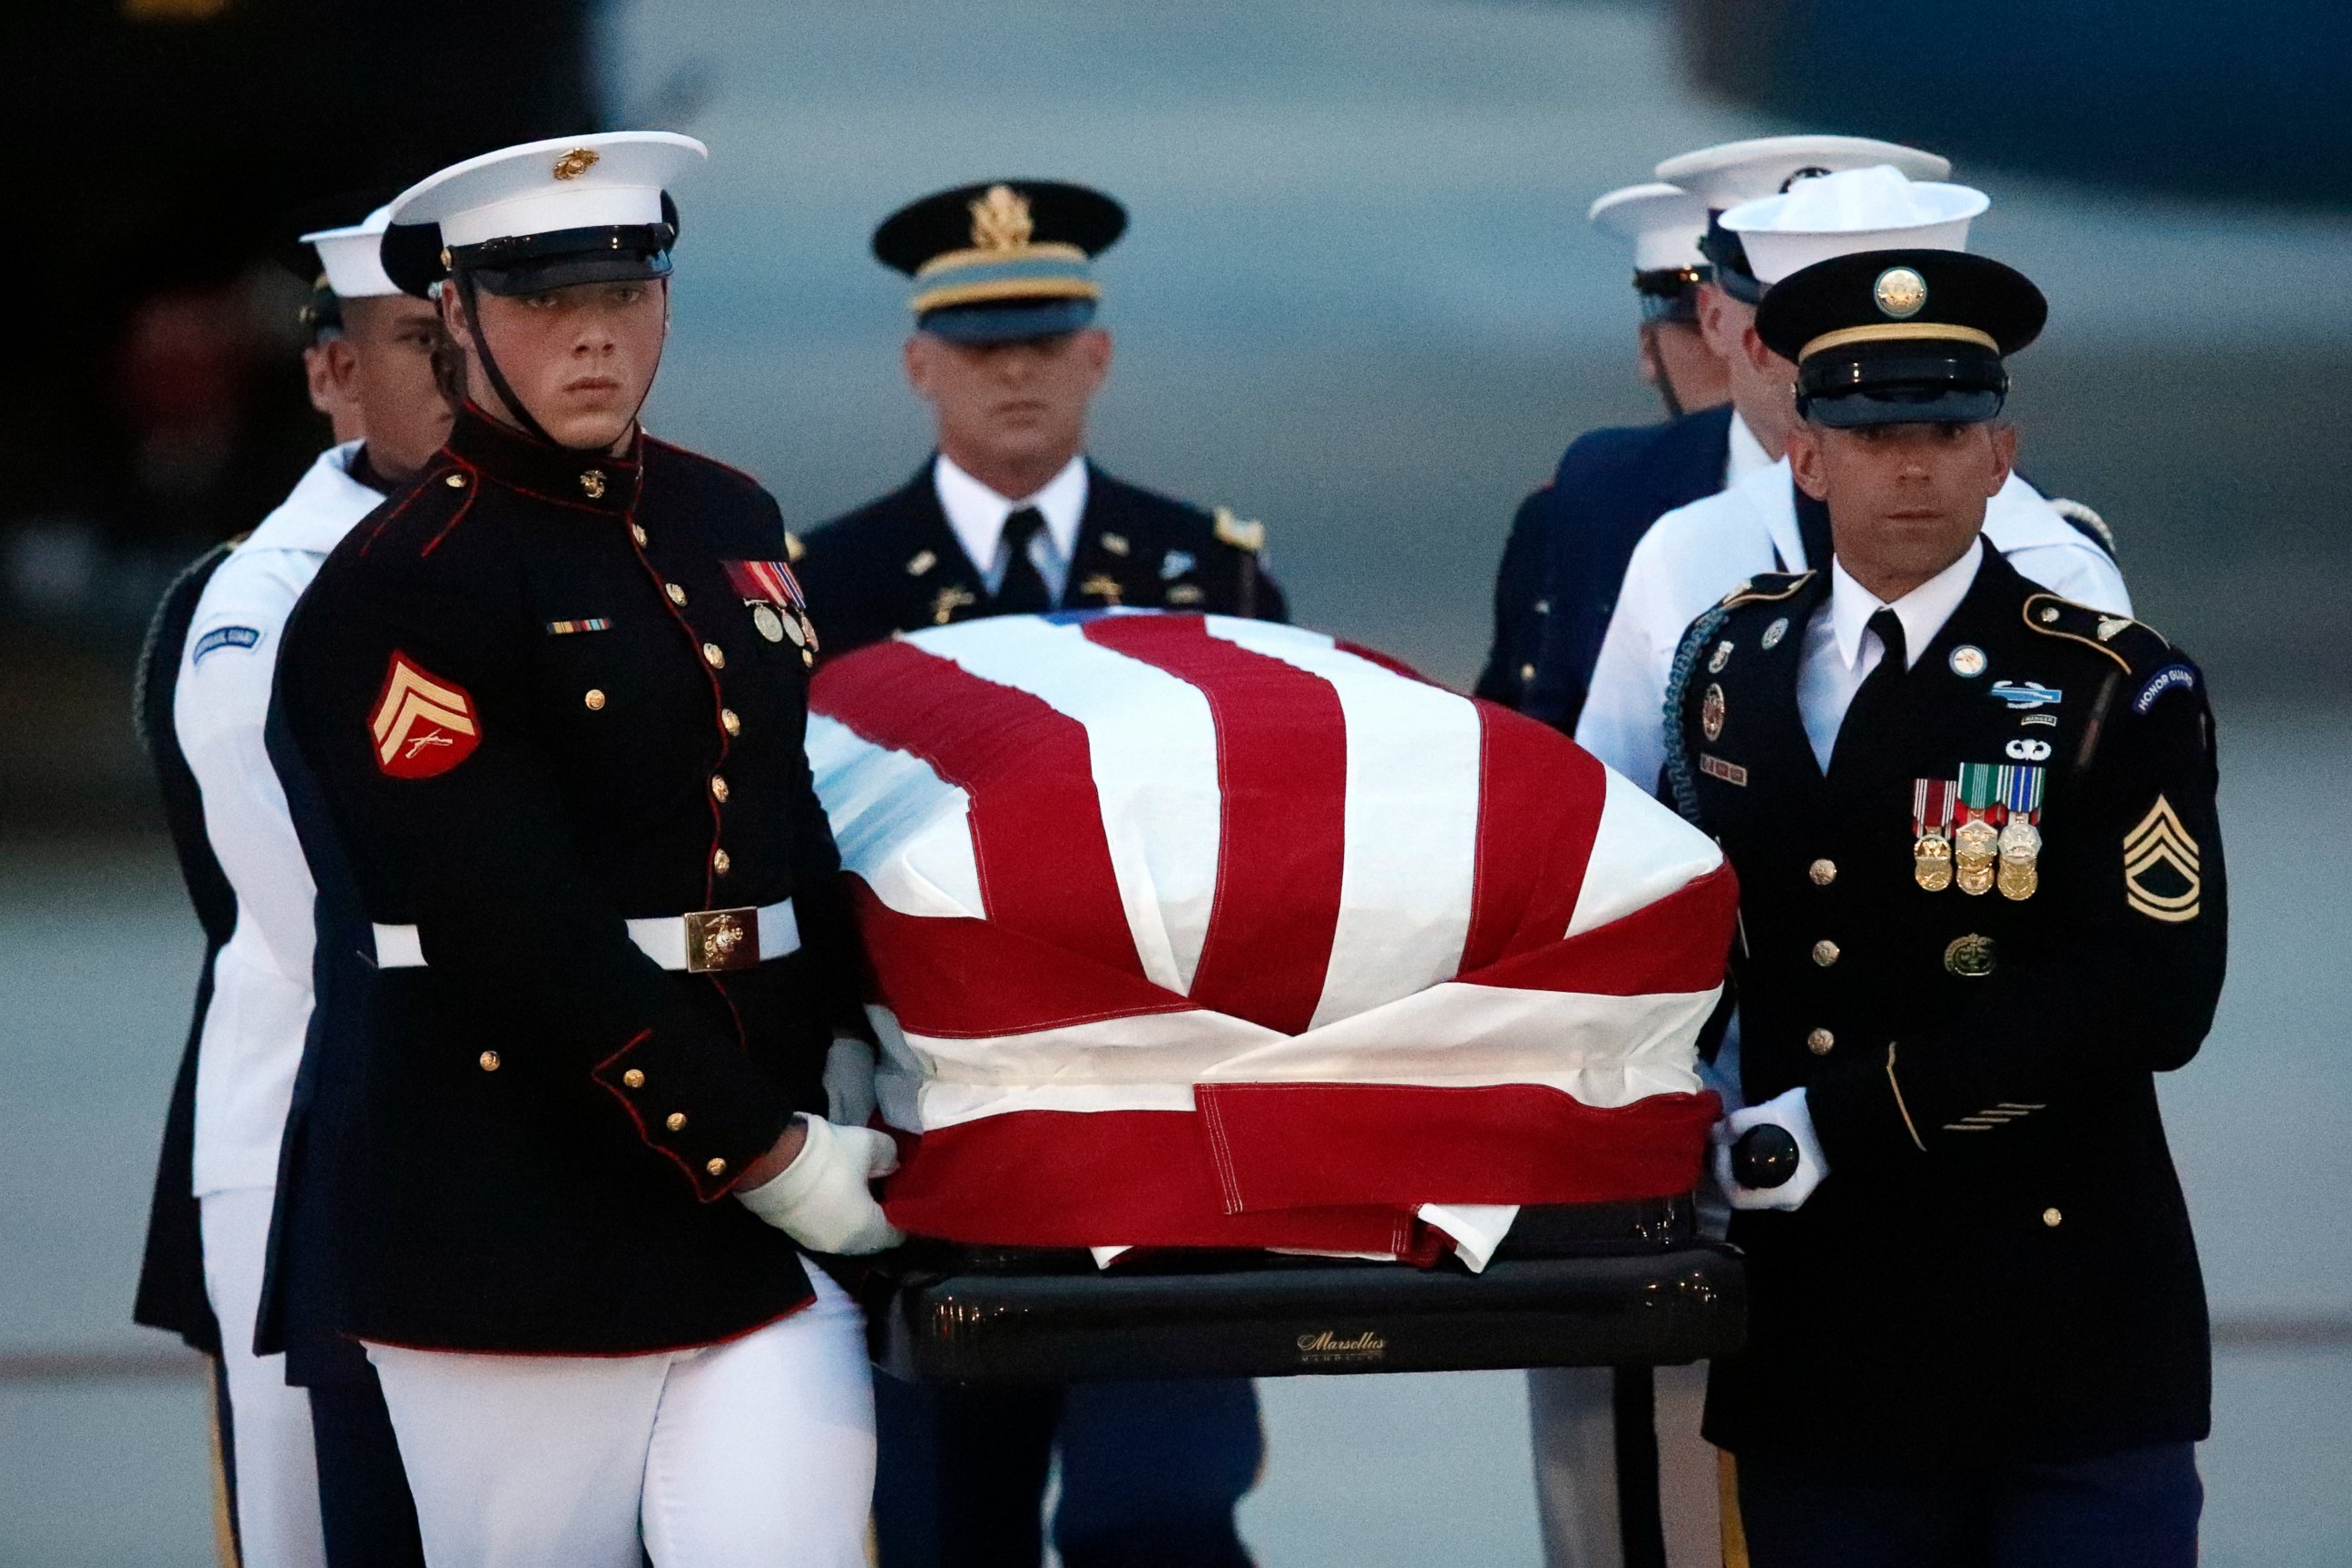 The flag-draped casket of Sen. John McCain, R-Ariz., is carried by an Armed Forces body bearer team to a hearse, Thursday, Aug. 30, 2018, at Andrews Air Force Base, Md.